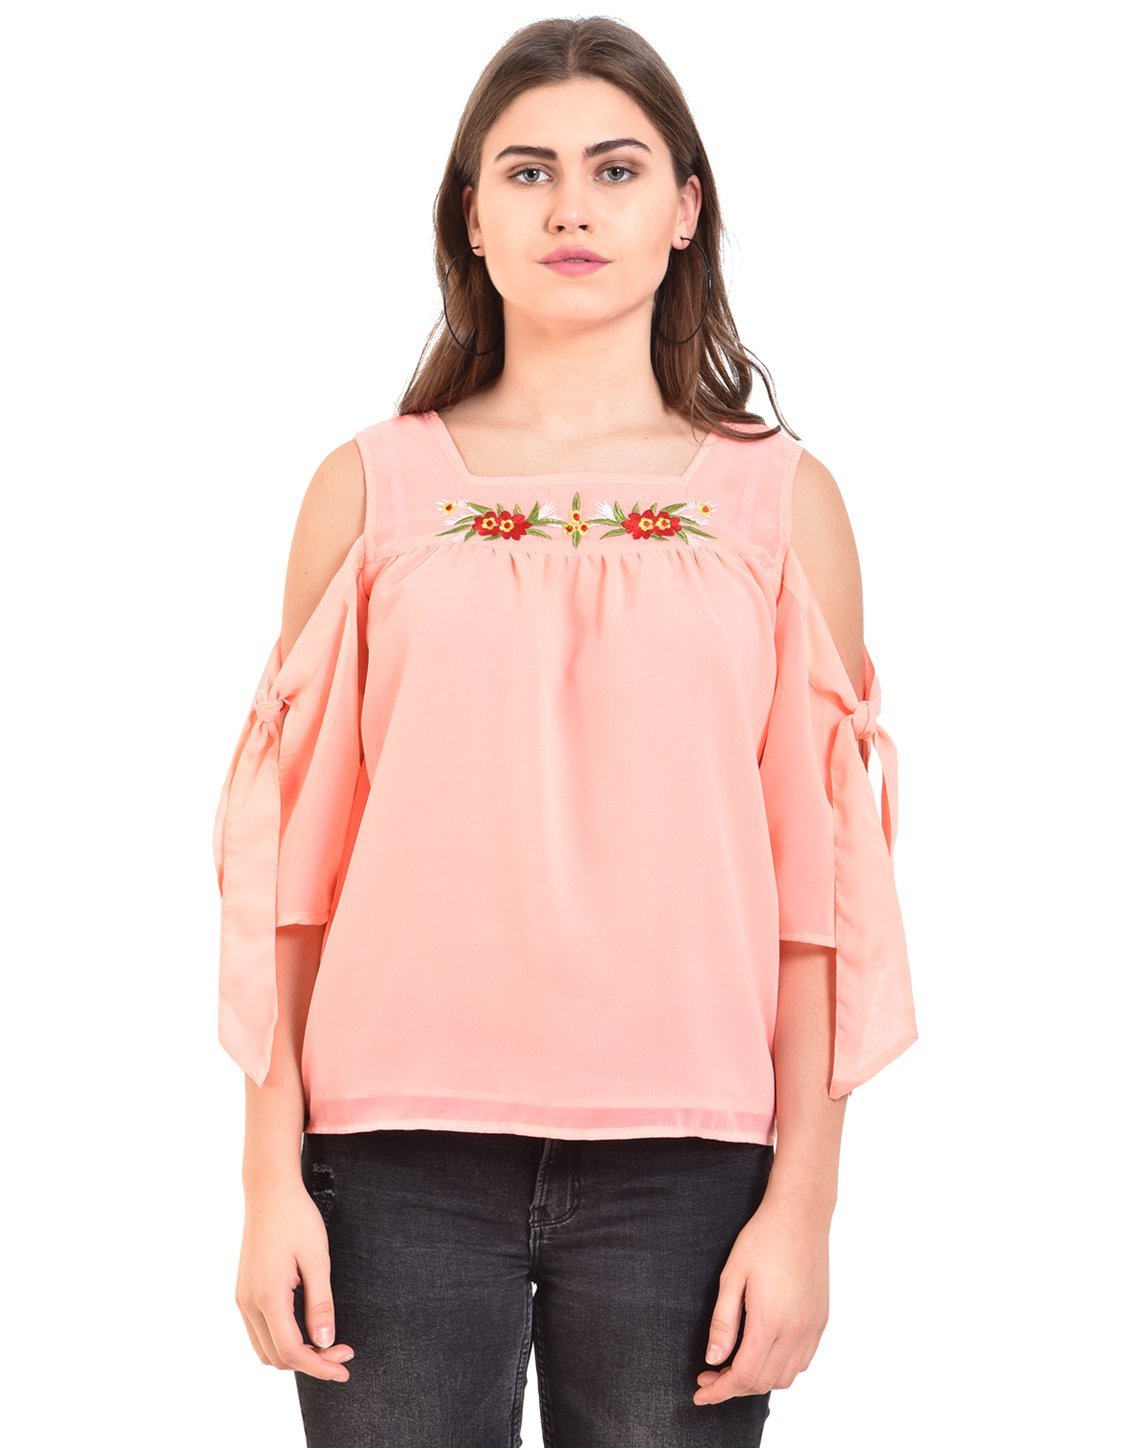 Women's Pink Solid 3/4 Sleeve Round Crepe Casual Top - Myshka